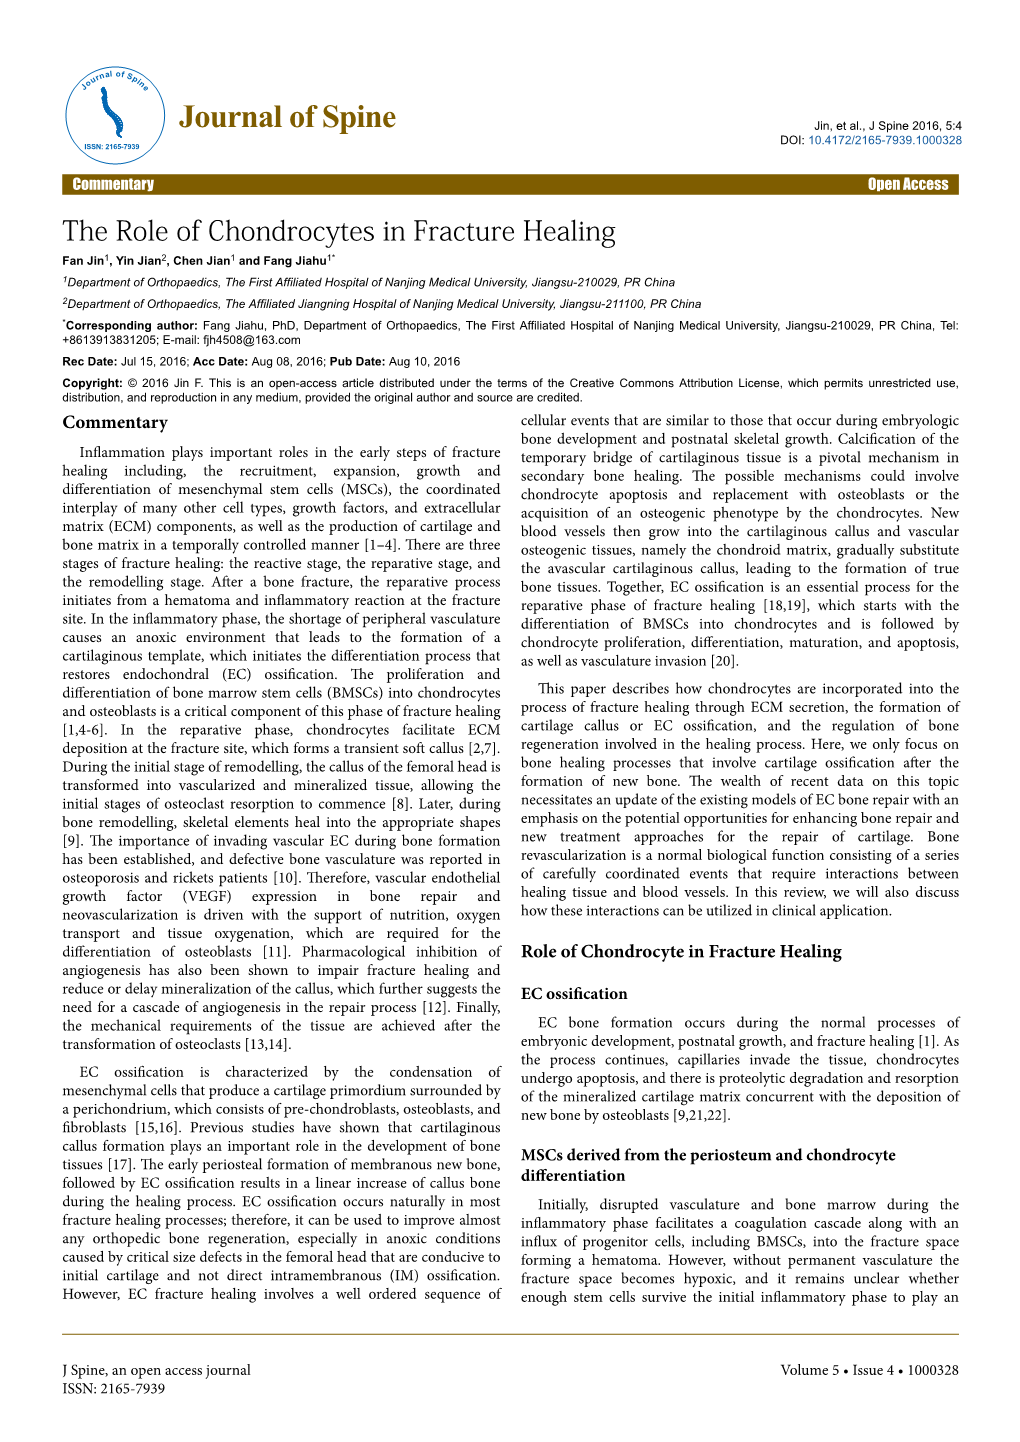 The Role of Chondrocytes in Fracture Healing